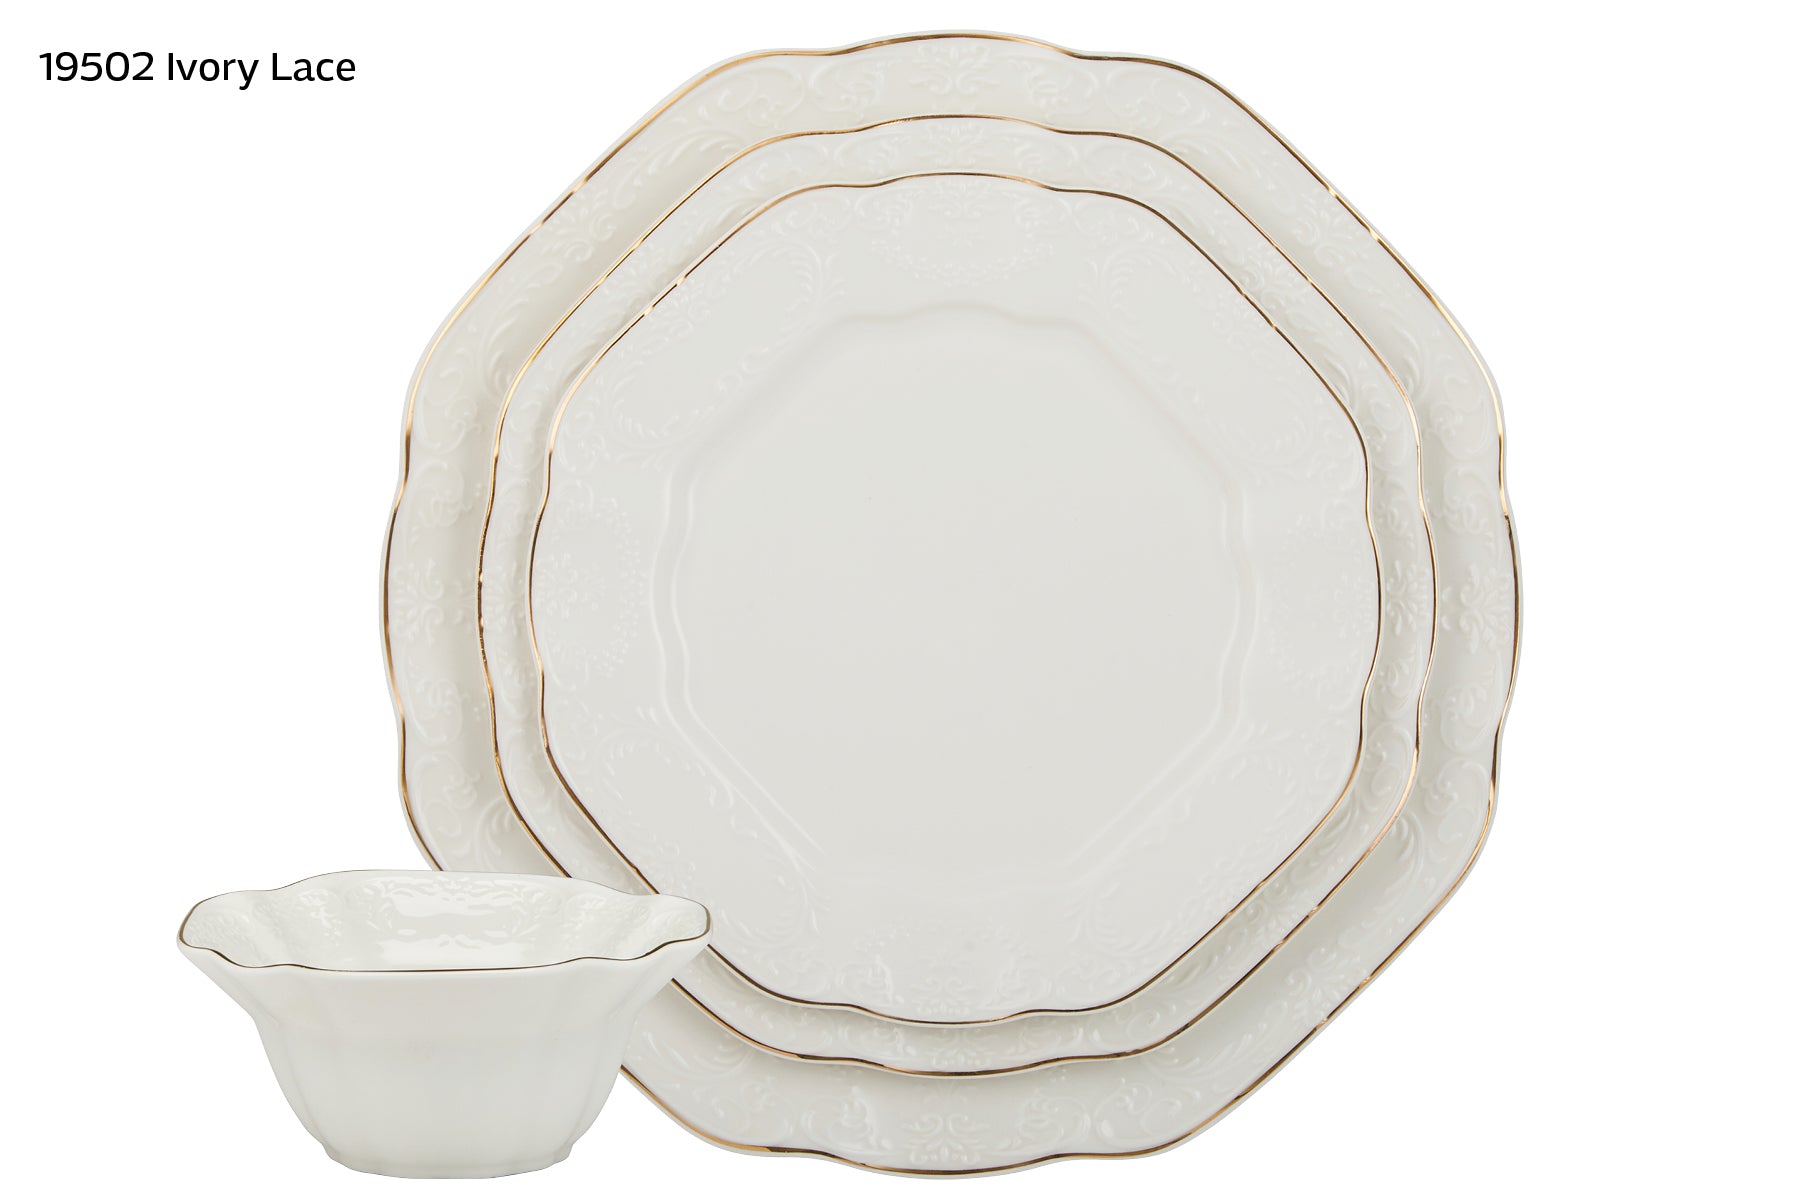 Exquisite Ivory Lace 20 Piece Bone China Dinnerware Set, Service for 4